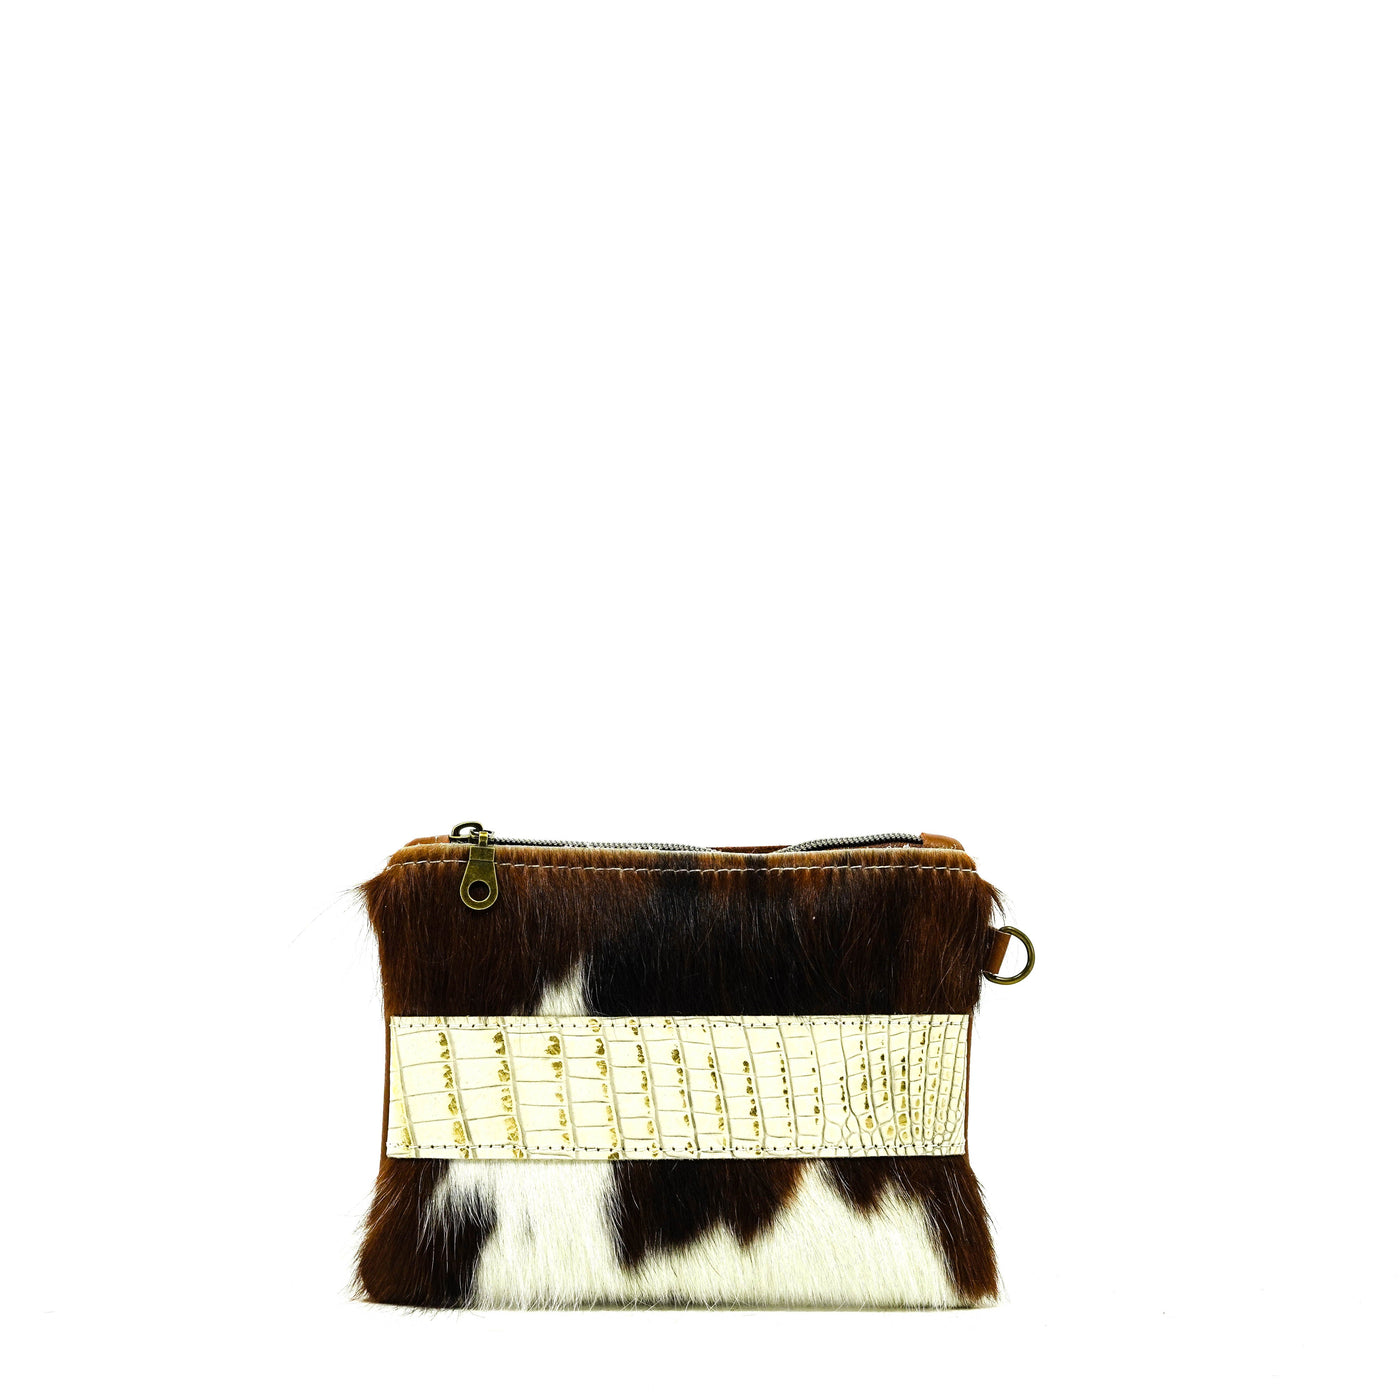 Purse Organizer - Tricolor w/ Ivory Croc-Purse Organizer-Western-Cowhide-Bags-Handmade-Products-Gifts-Dancing Cactus Designs